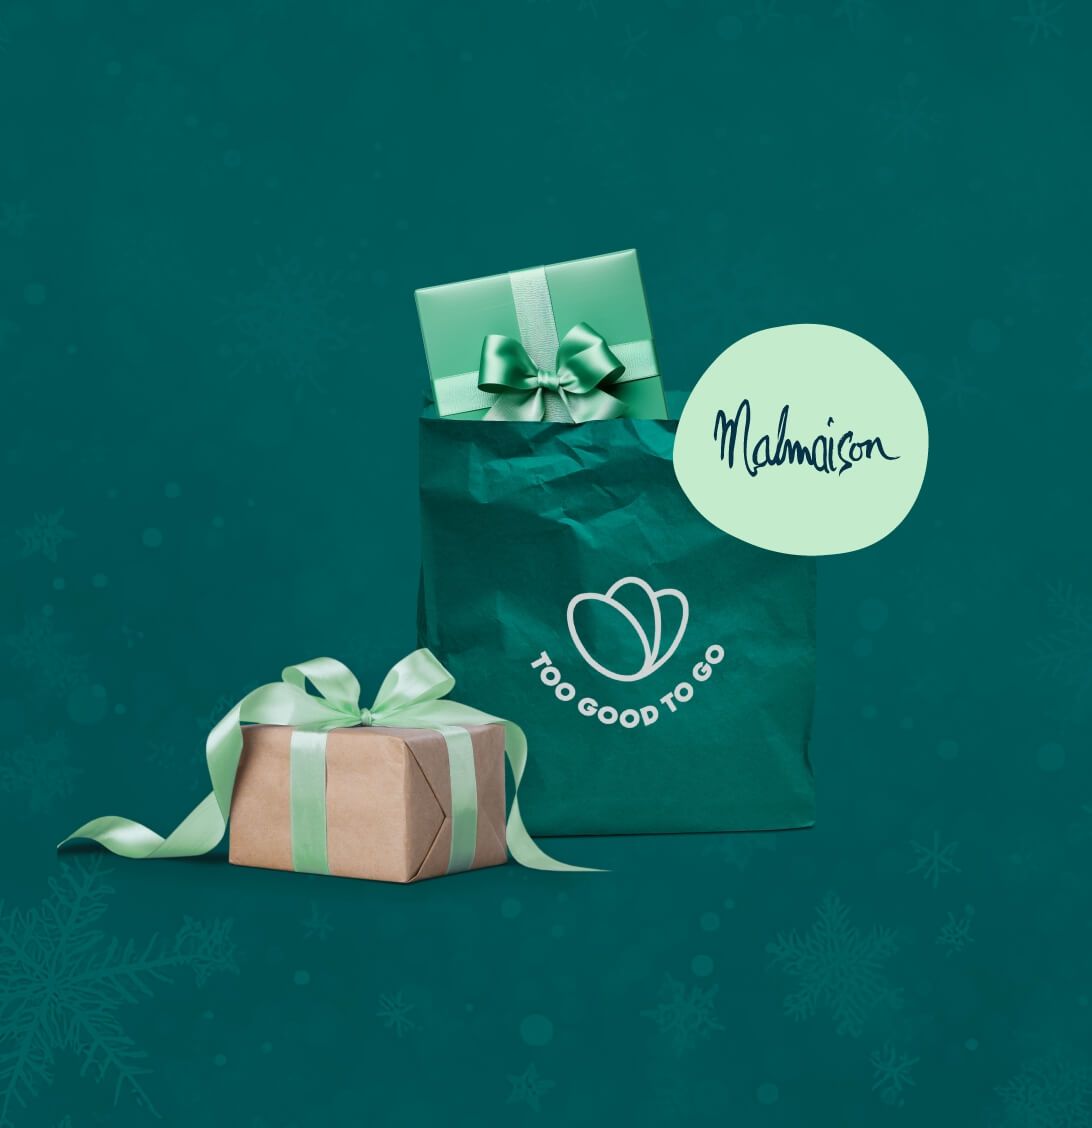 Save 2 Surprise Bags to win a night's stay in Malmaison London